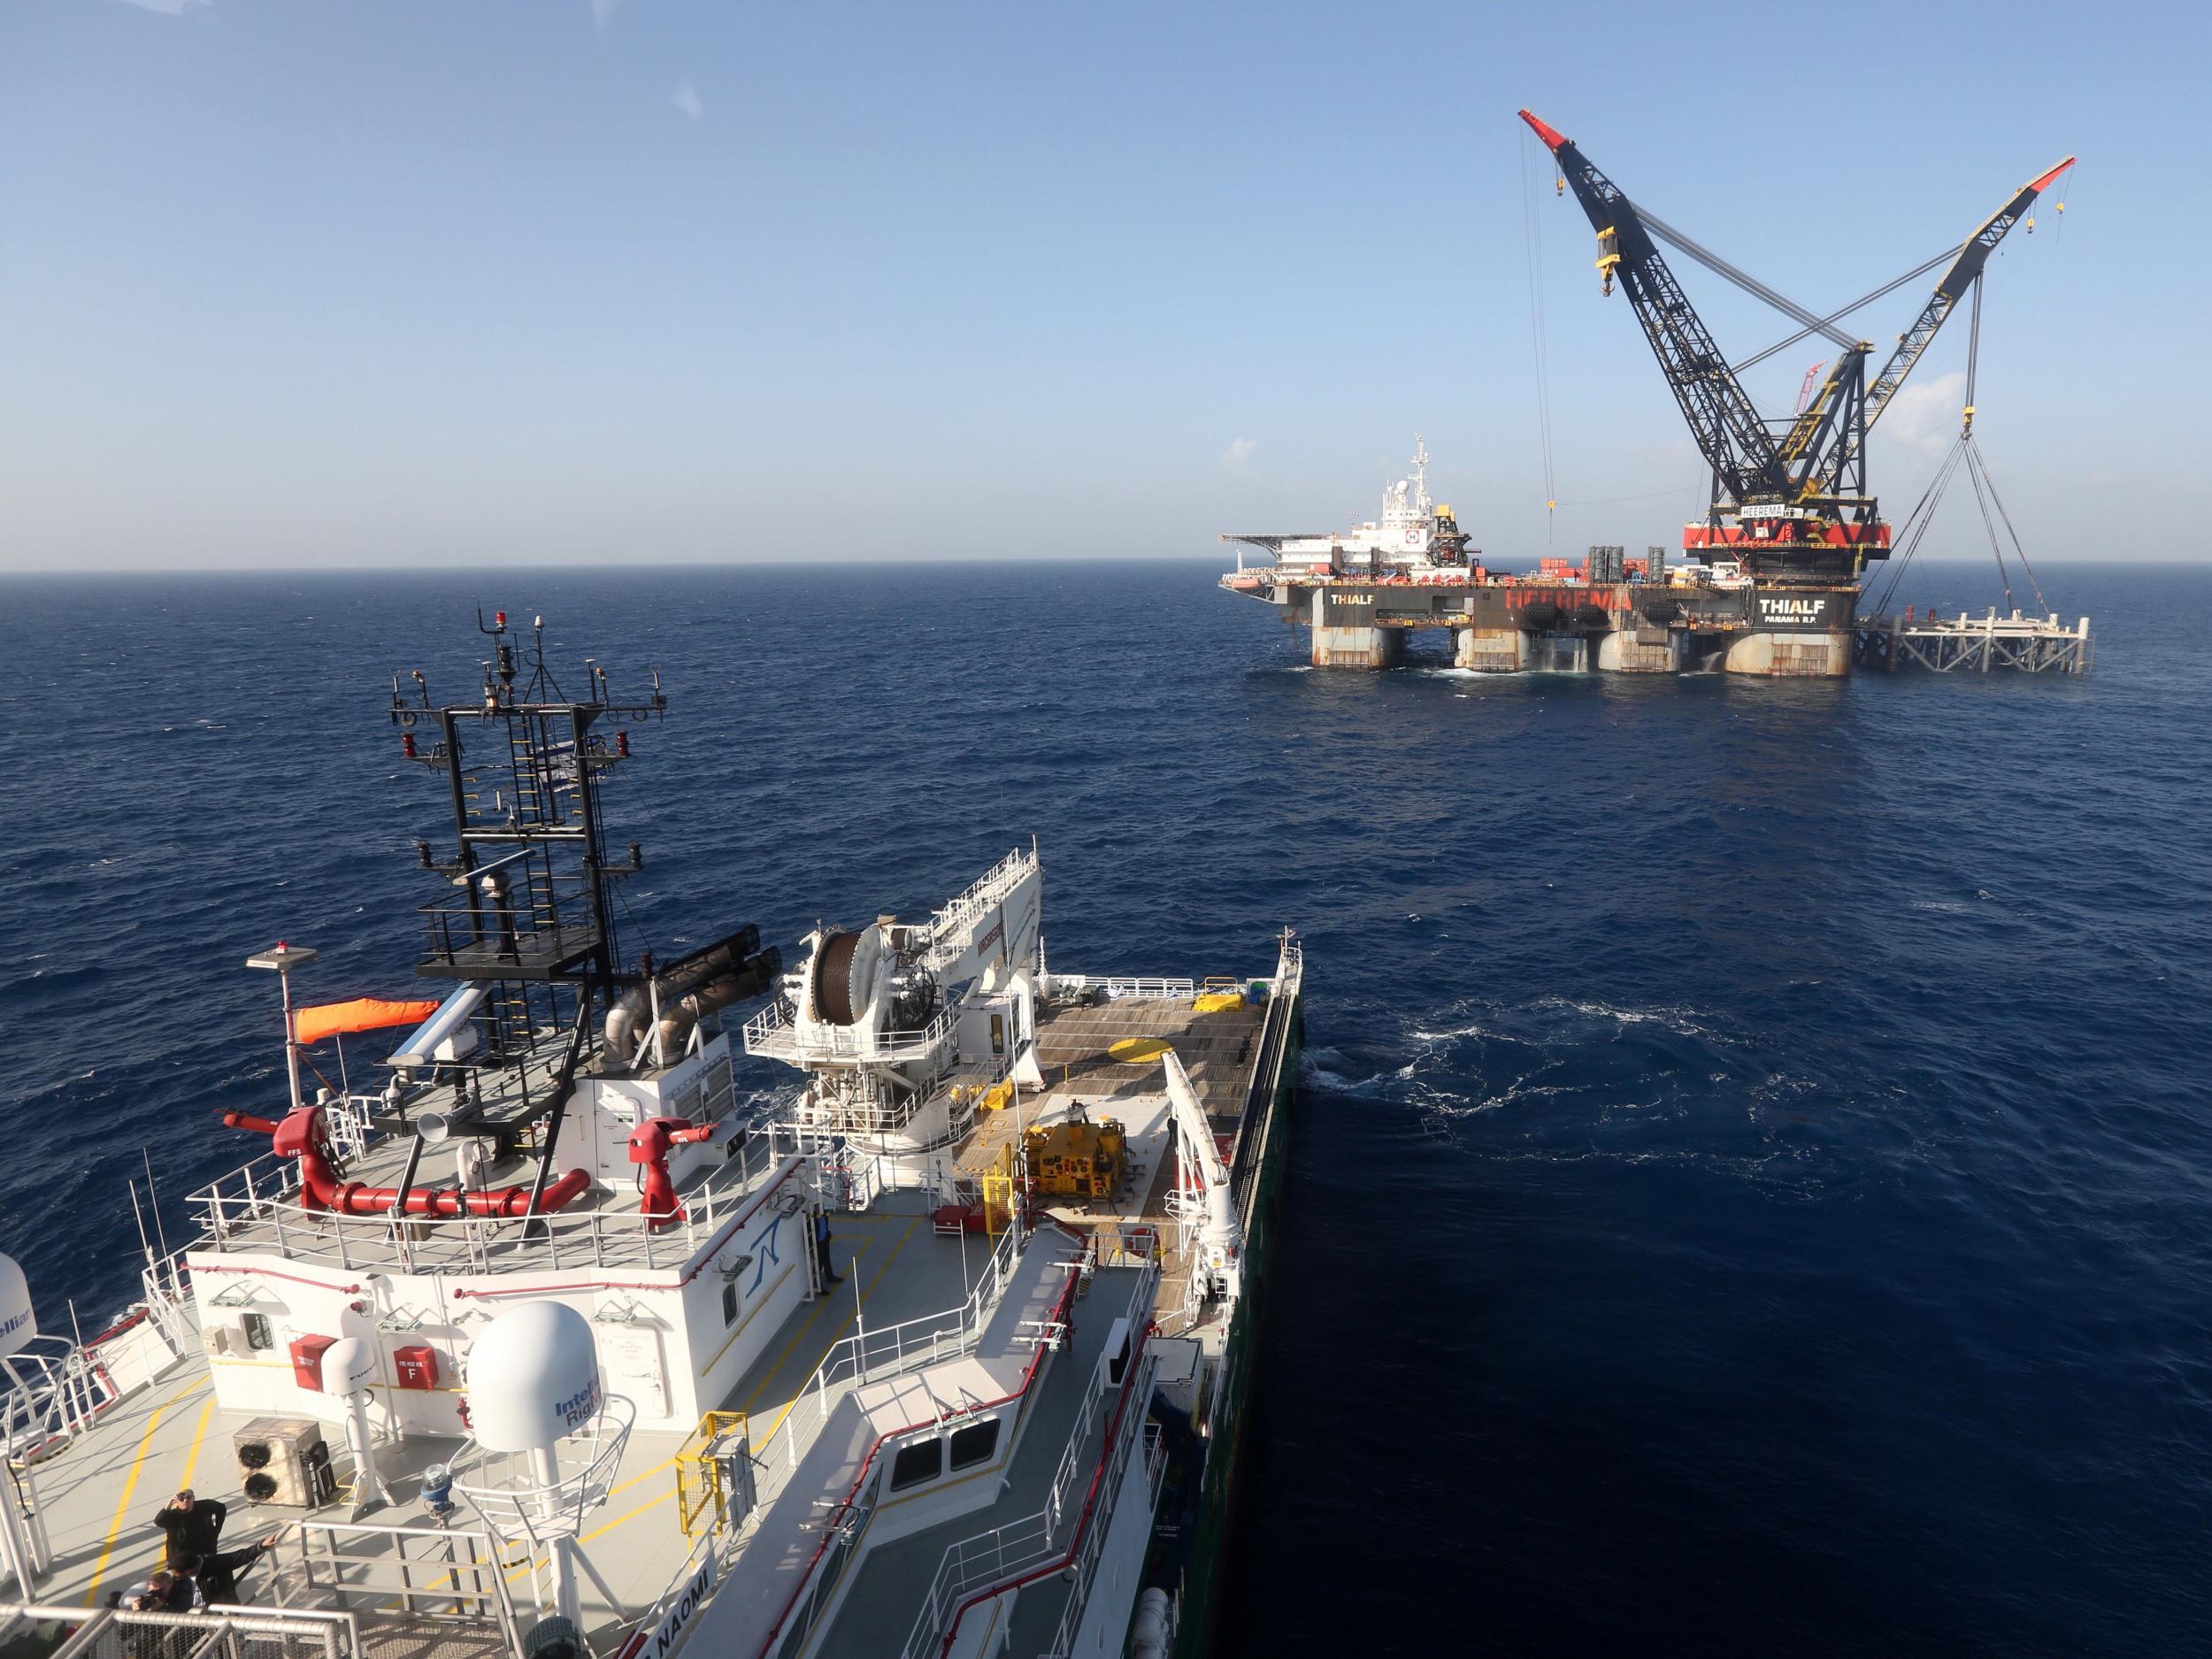 The Leviathan natural gas field, which is being reconstructed to connect to the mainland by the end of the year